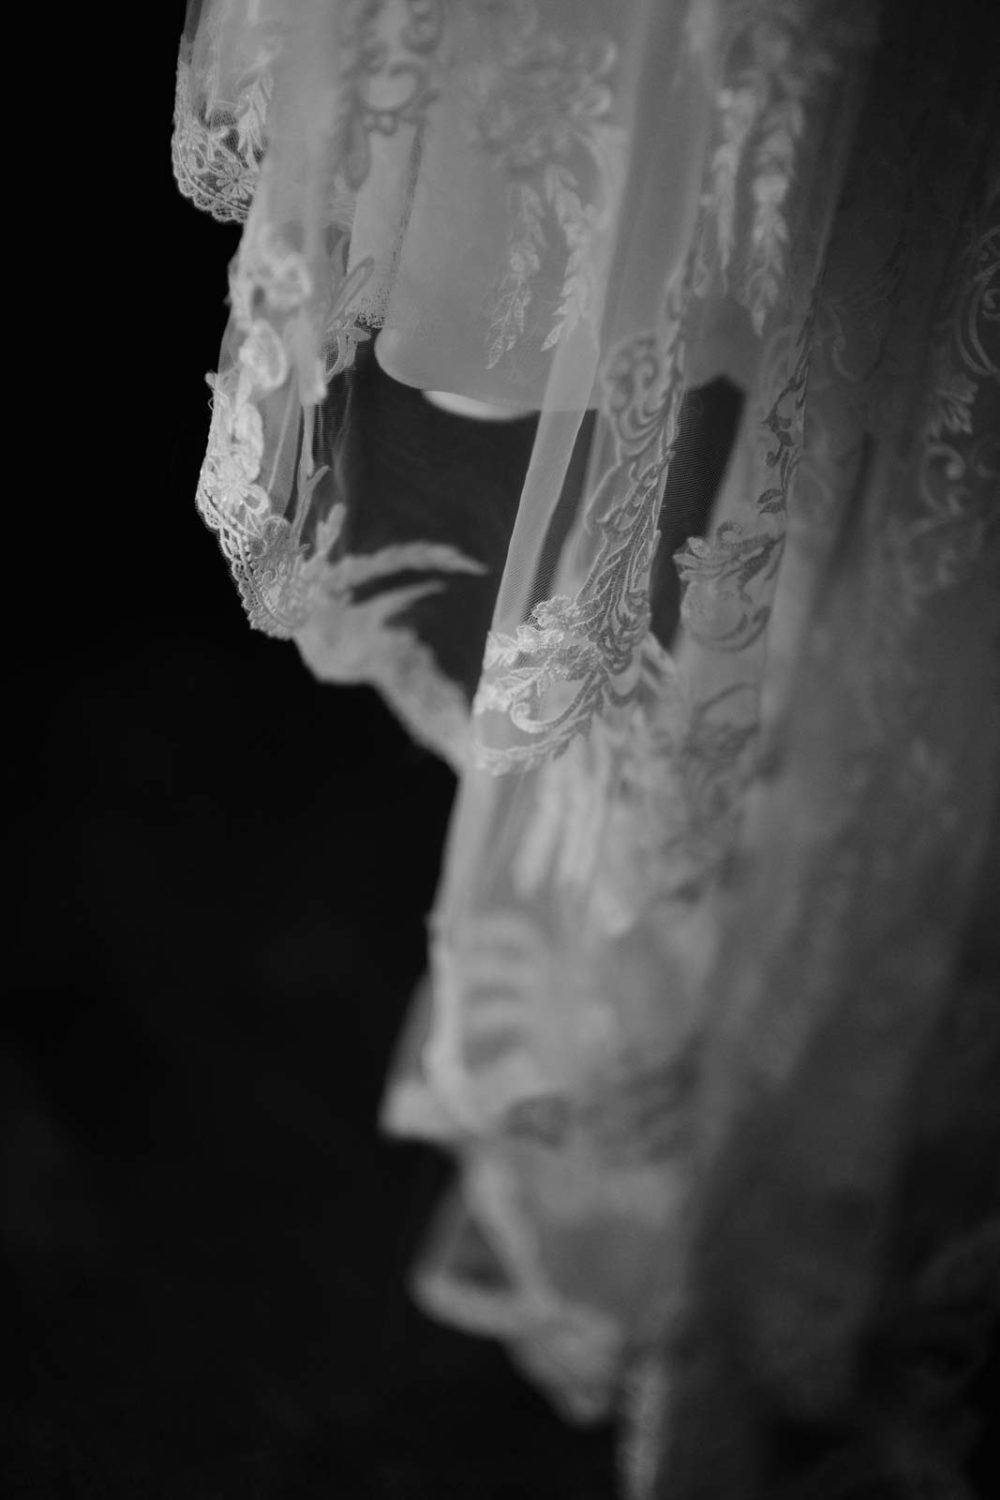 Details of the veil in black and white Sacred Heart Chapel-Leica photographer-Philip Thomas Photography